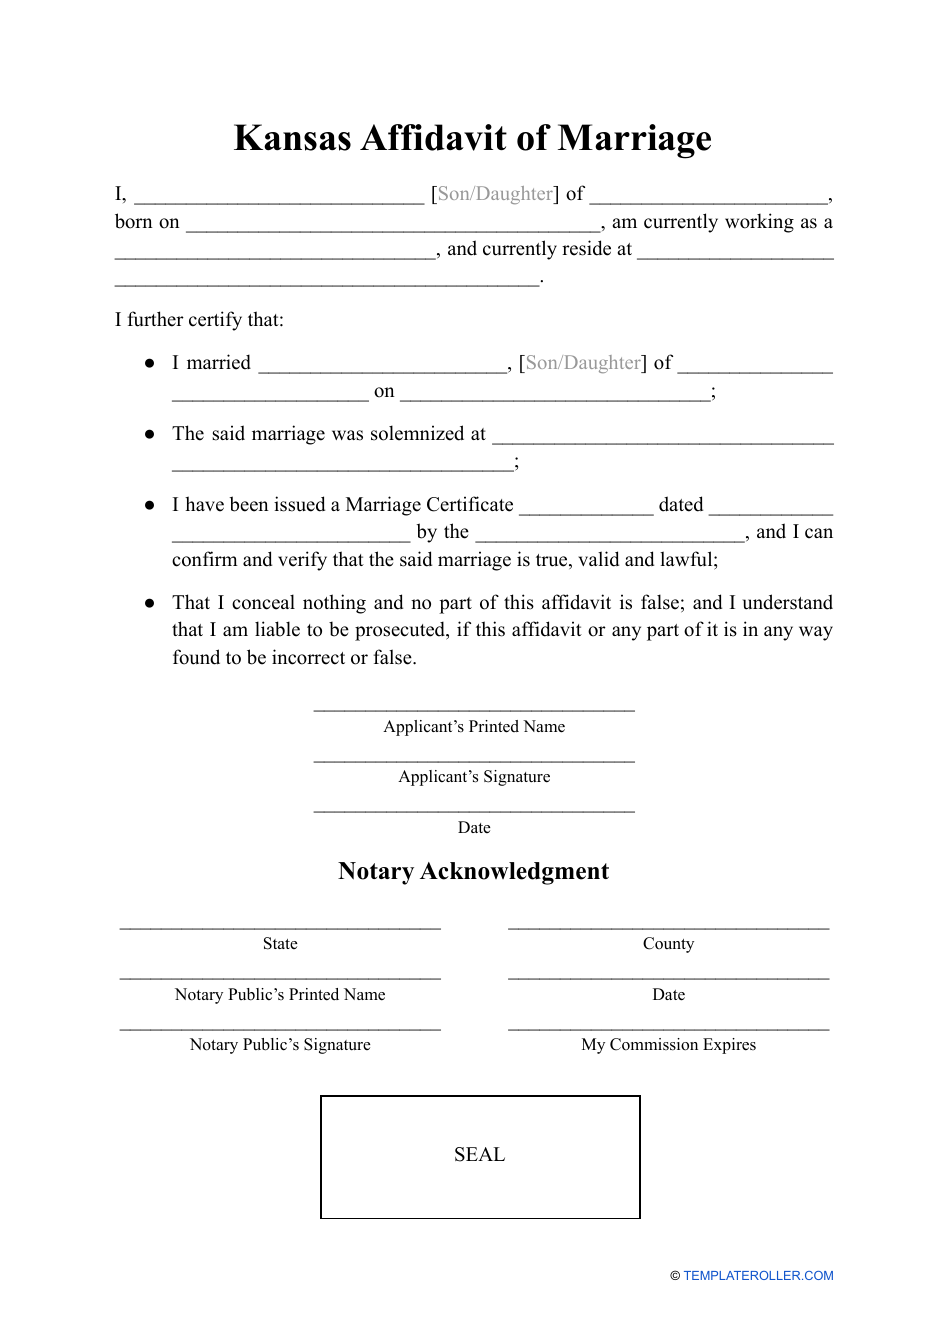 Kansas Affidavit Of Marriage Fill Out Sign Online And Download Pdf Templateroller 2655